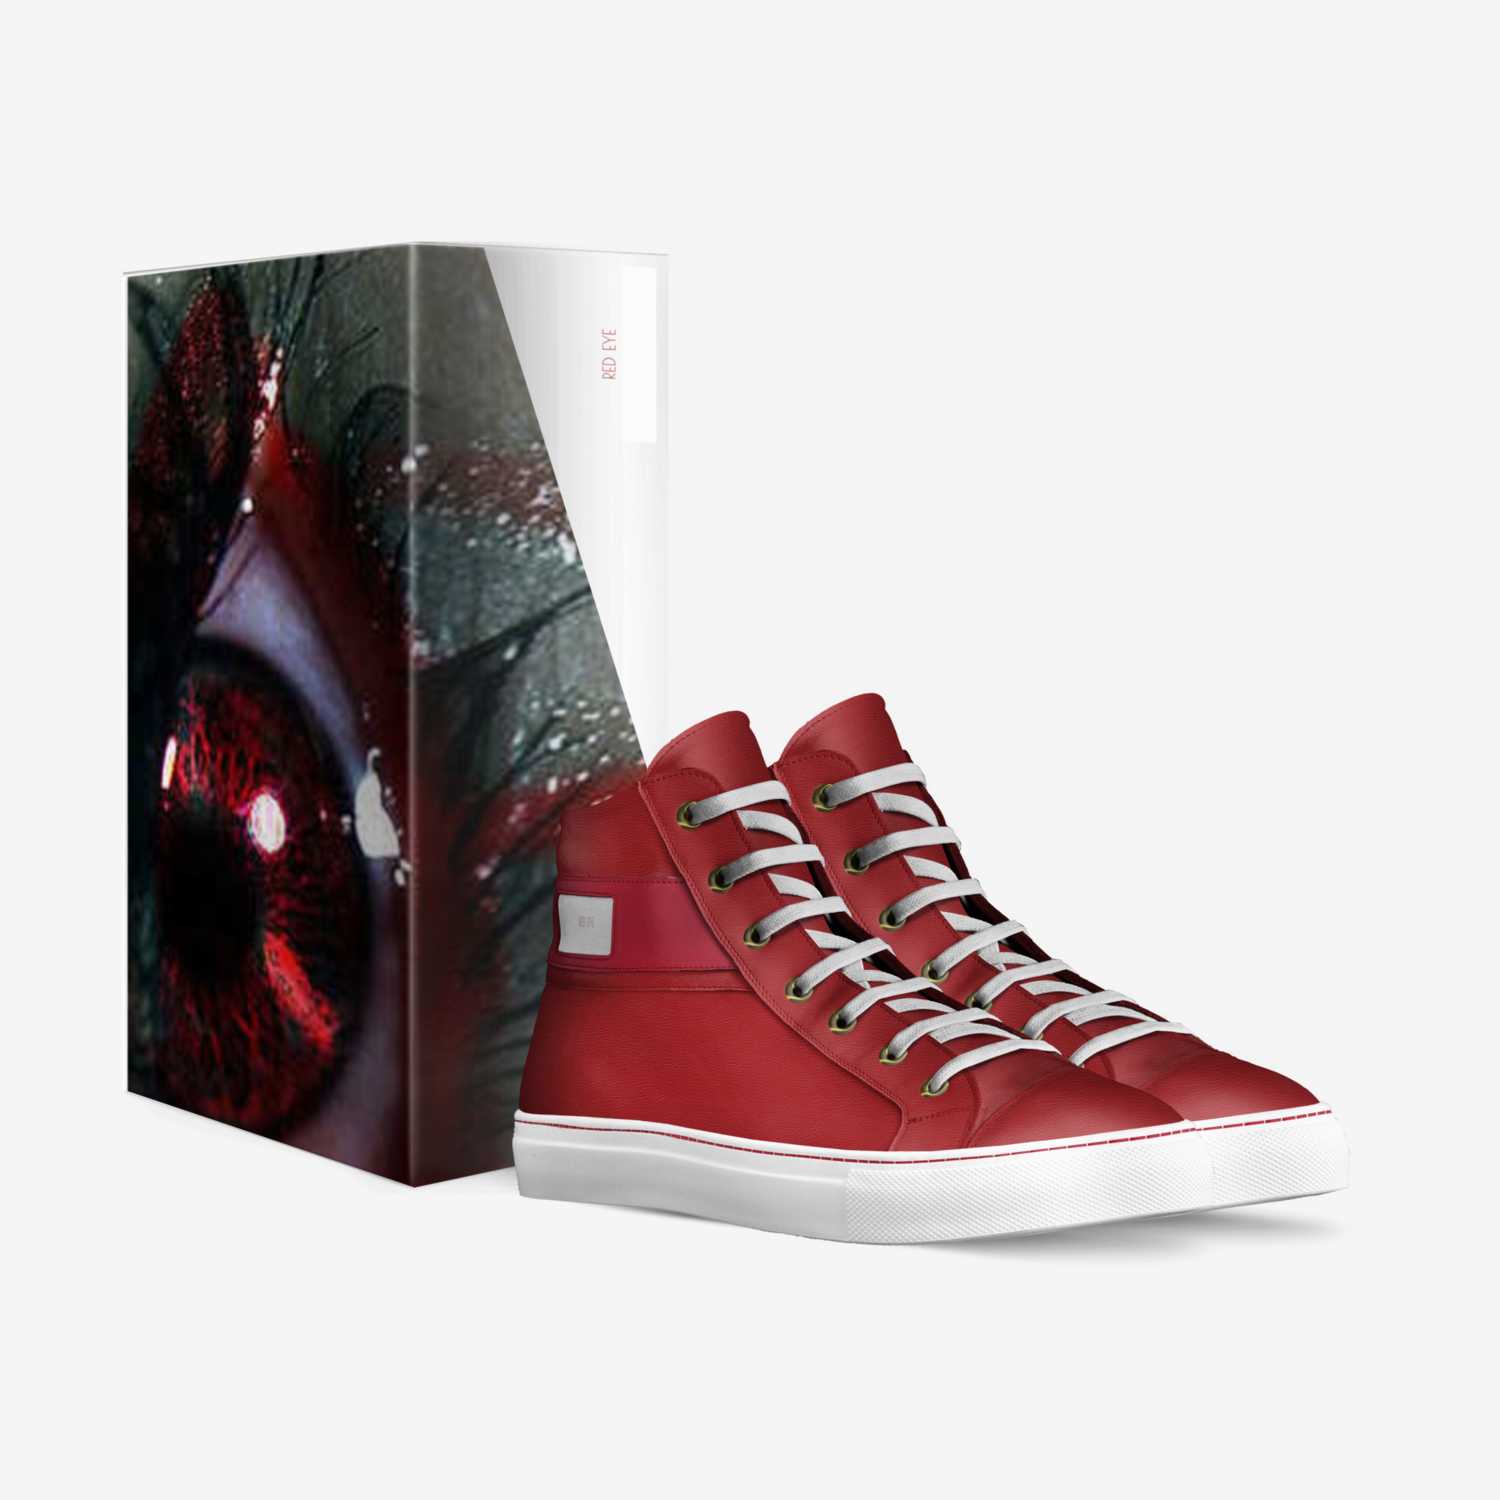 Red Eye custom made in Italy shoes by Shel-aliyah Higgs | Box view